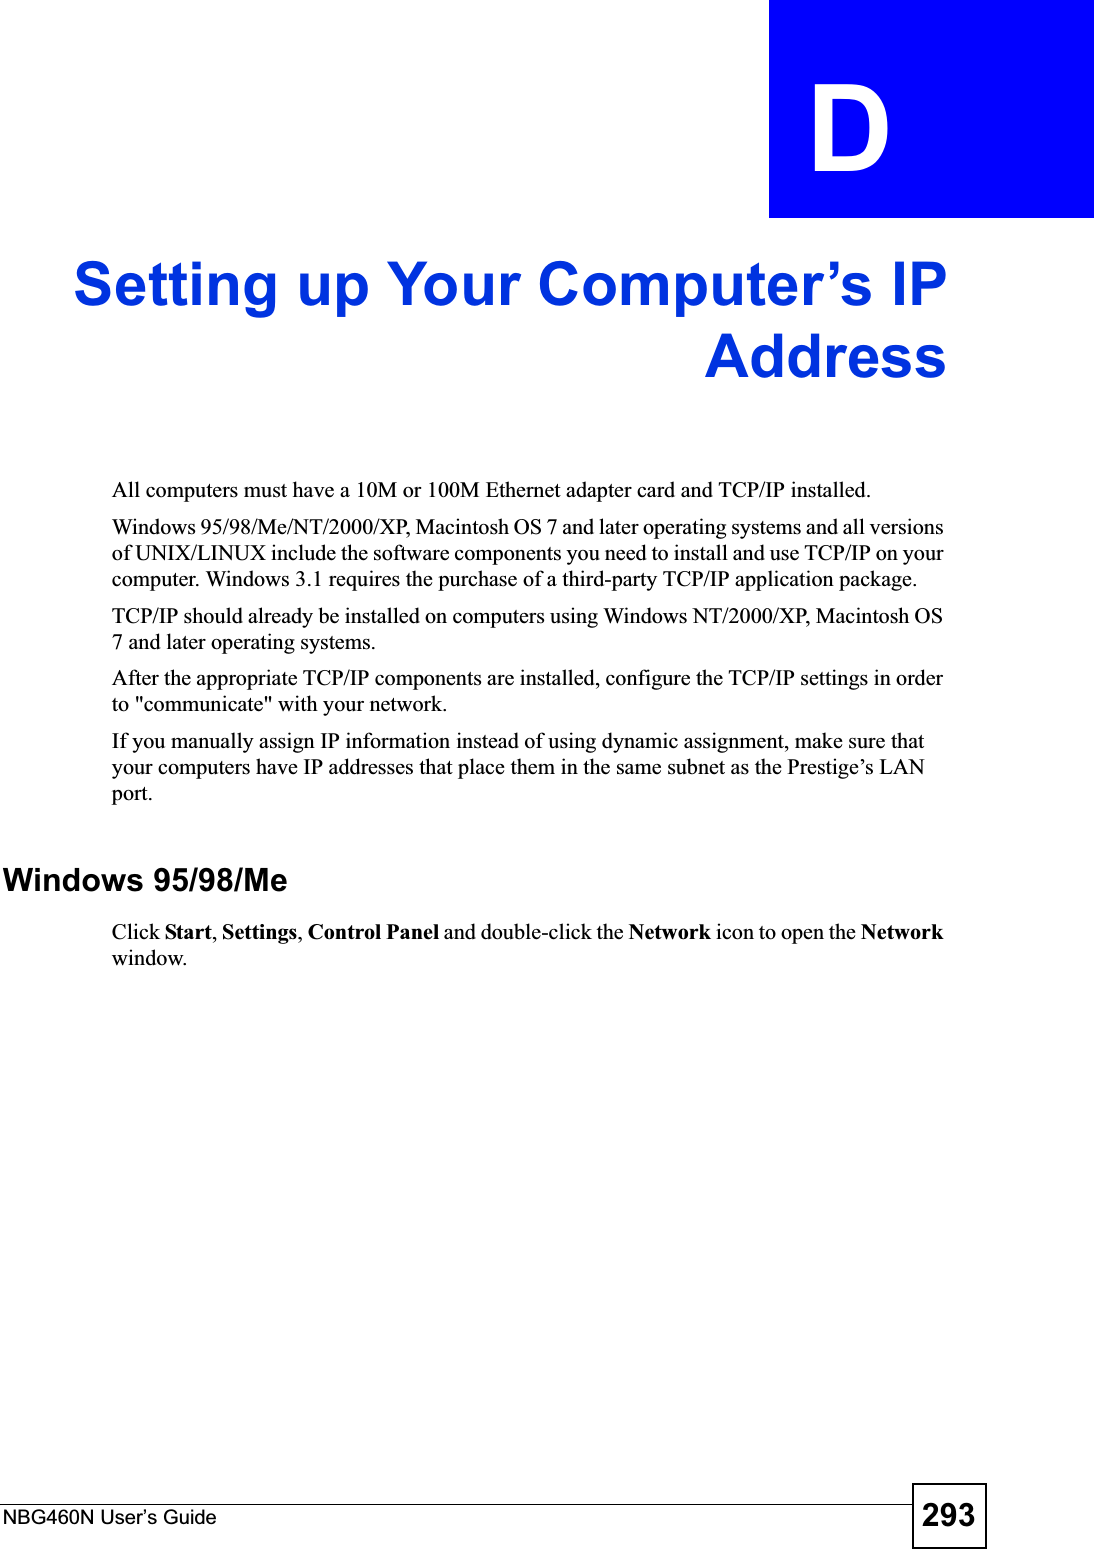 NBG460N User’s Guide 293APPENDIX  D Setting up Your Computer’s IPAddressAll computers must have a 10M or 100M Ethernet adapter card and TCP/IP installed. Windows 95/98/Me/NT/2000/XP, Macintosh OS 7 and later operating systems and all versions of UNIX/LINUX include the software components you need to install and use TCP/IP on your computer. Windows 3.1 requires the purchase of a third-party TCP/IP application package.TCP/IP should already be installed on computers using Windows NT/2000/XP, Macintosh OS 7 and later operating systems.After the appropriate TCP/IP components are installed, configure the TCP/IP settings in order to &quot;communicate&quot; with your network. If you manually assign IP information instead of using dynamic assignment, make sure that your computers have IP addresses that place them in the same subnet as the Prestige’s LAN port.Windows 95/98/MeClick Start,Settings,Control Panel and double-click the Network icon to open the Network window.